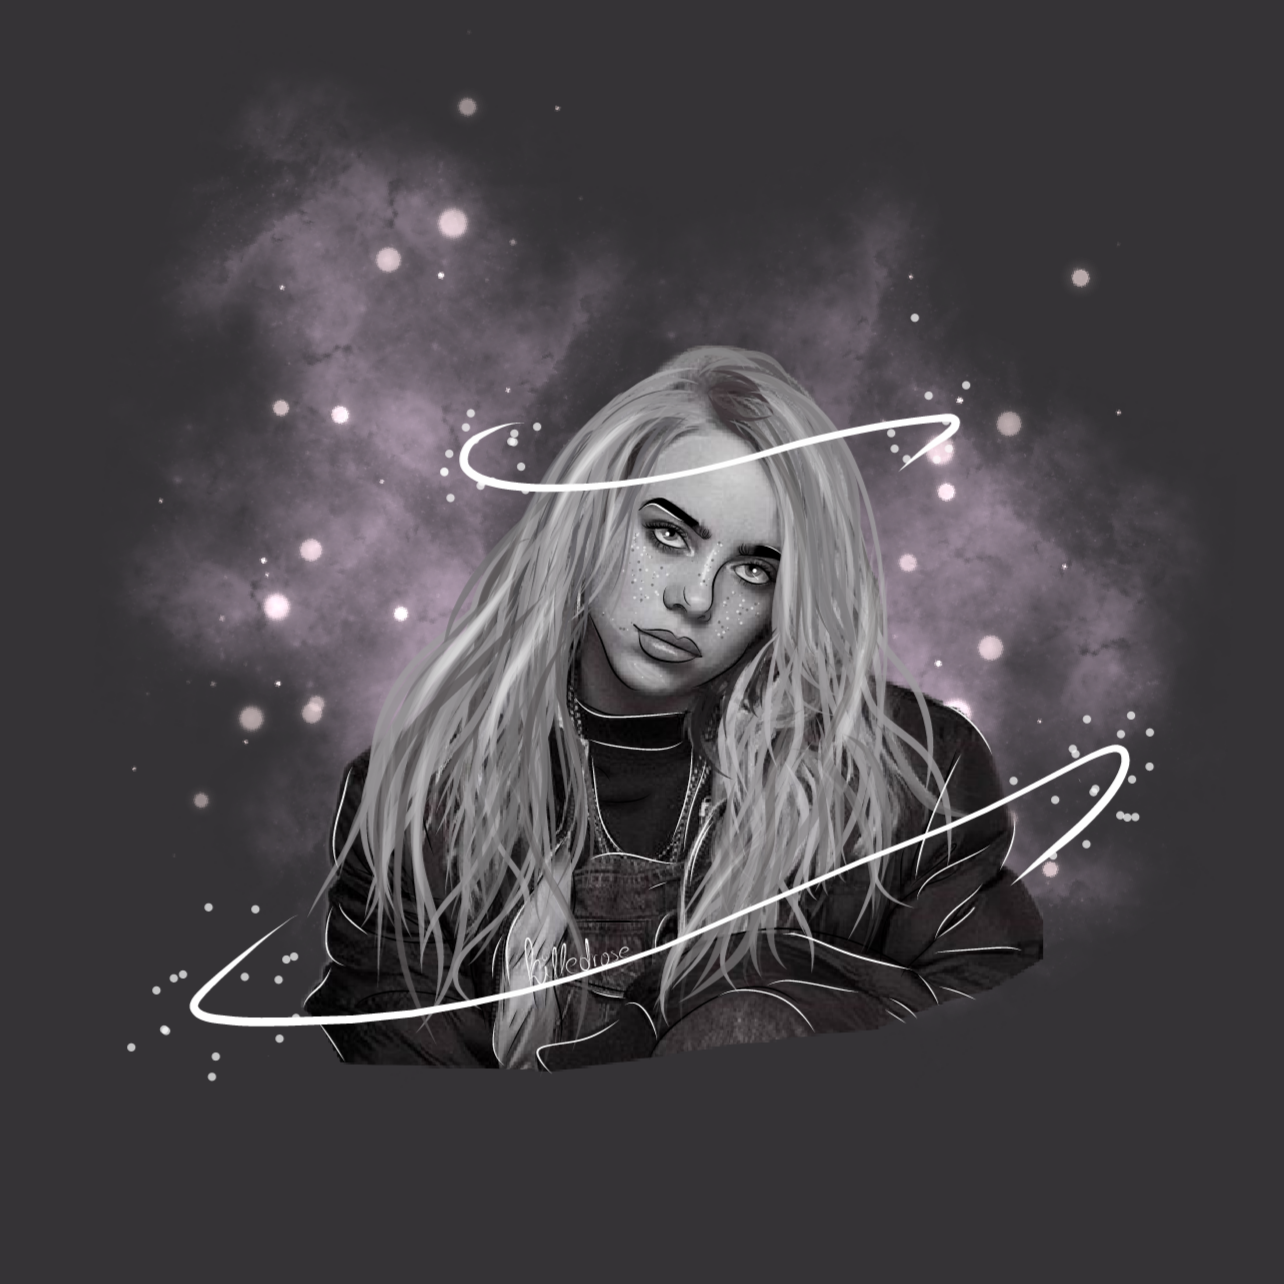 autie1721's Photos, Drawings and Gif Billie Eilish - 256 x 256 png 68kB